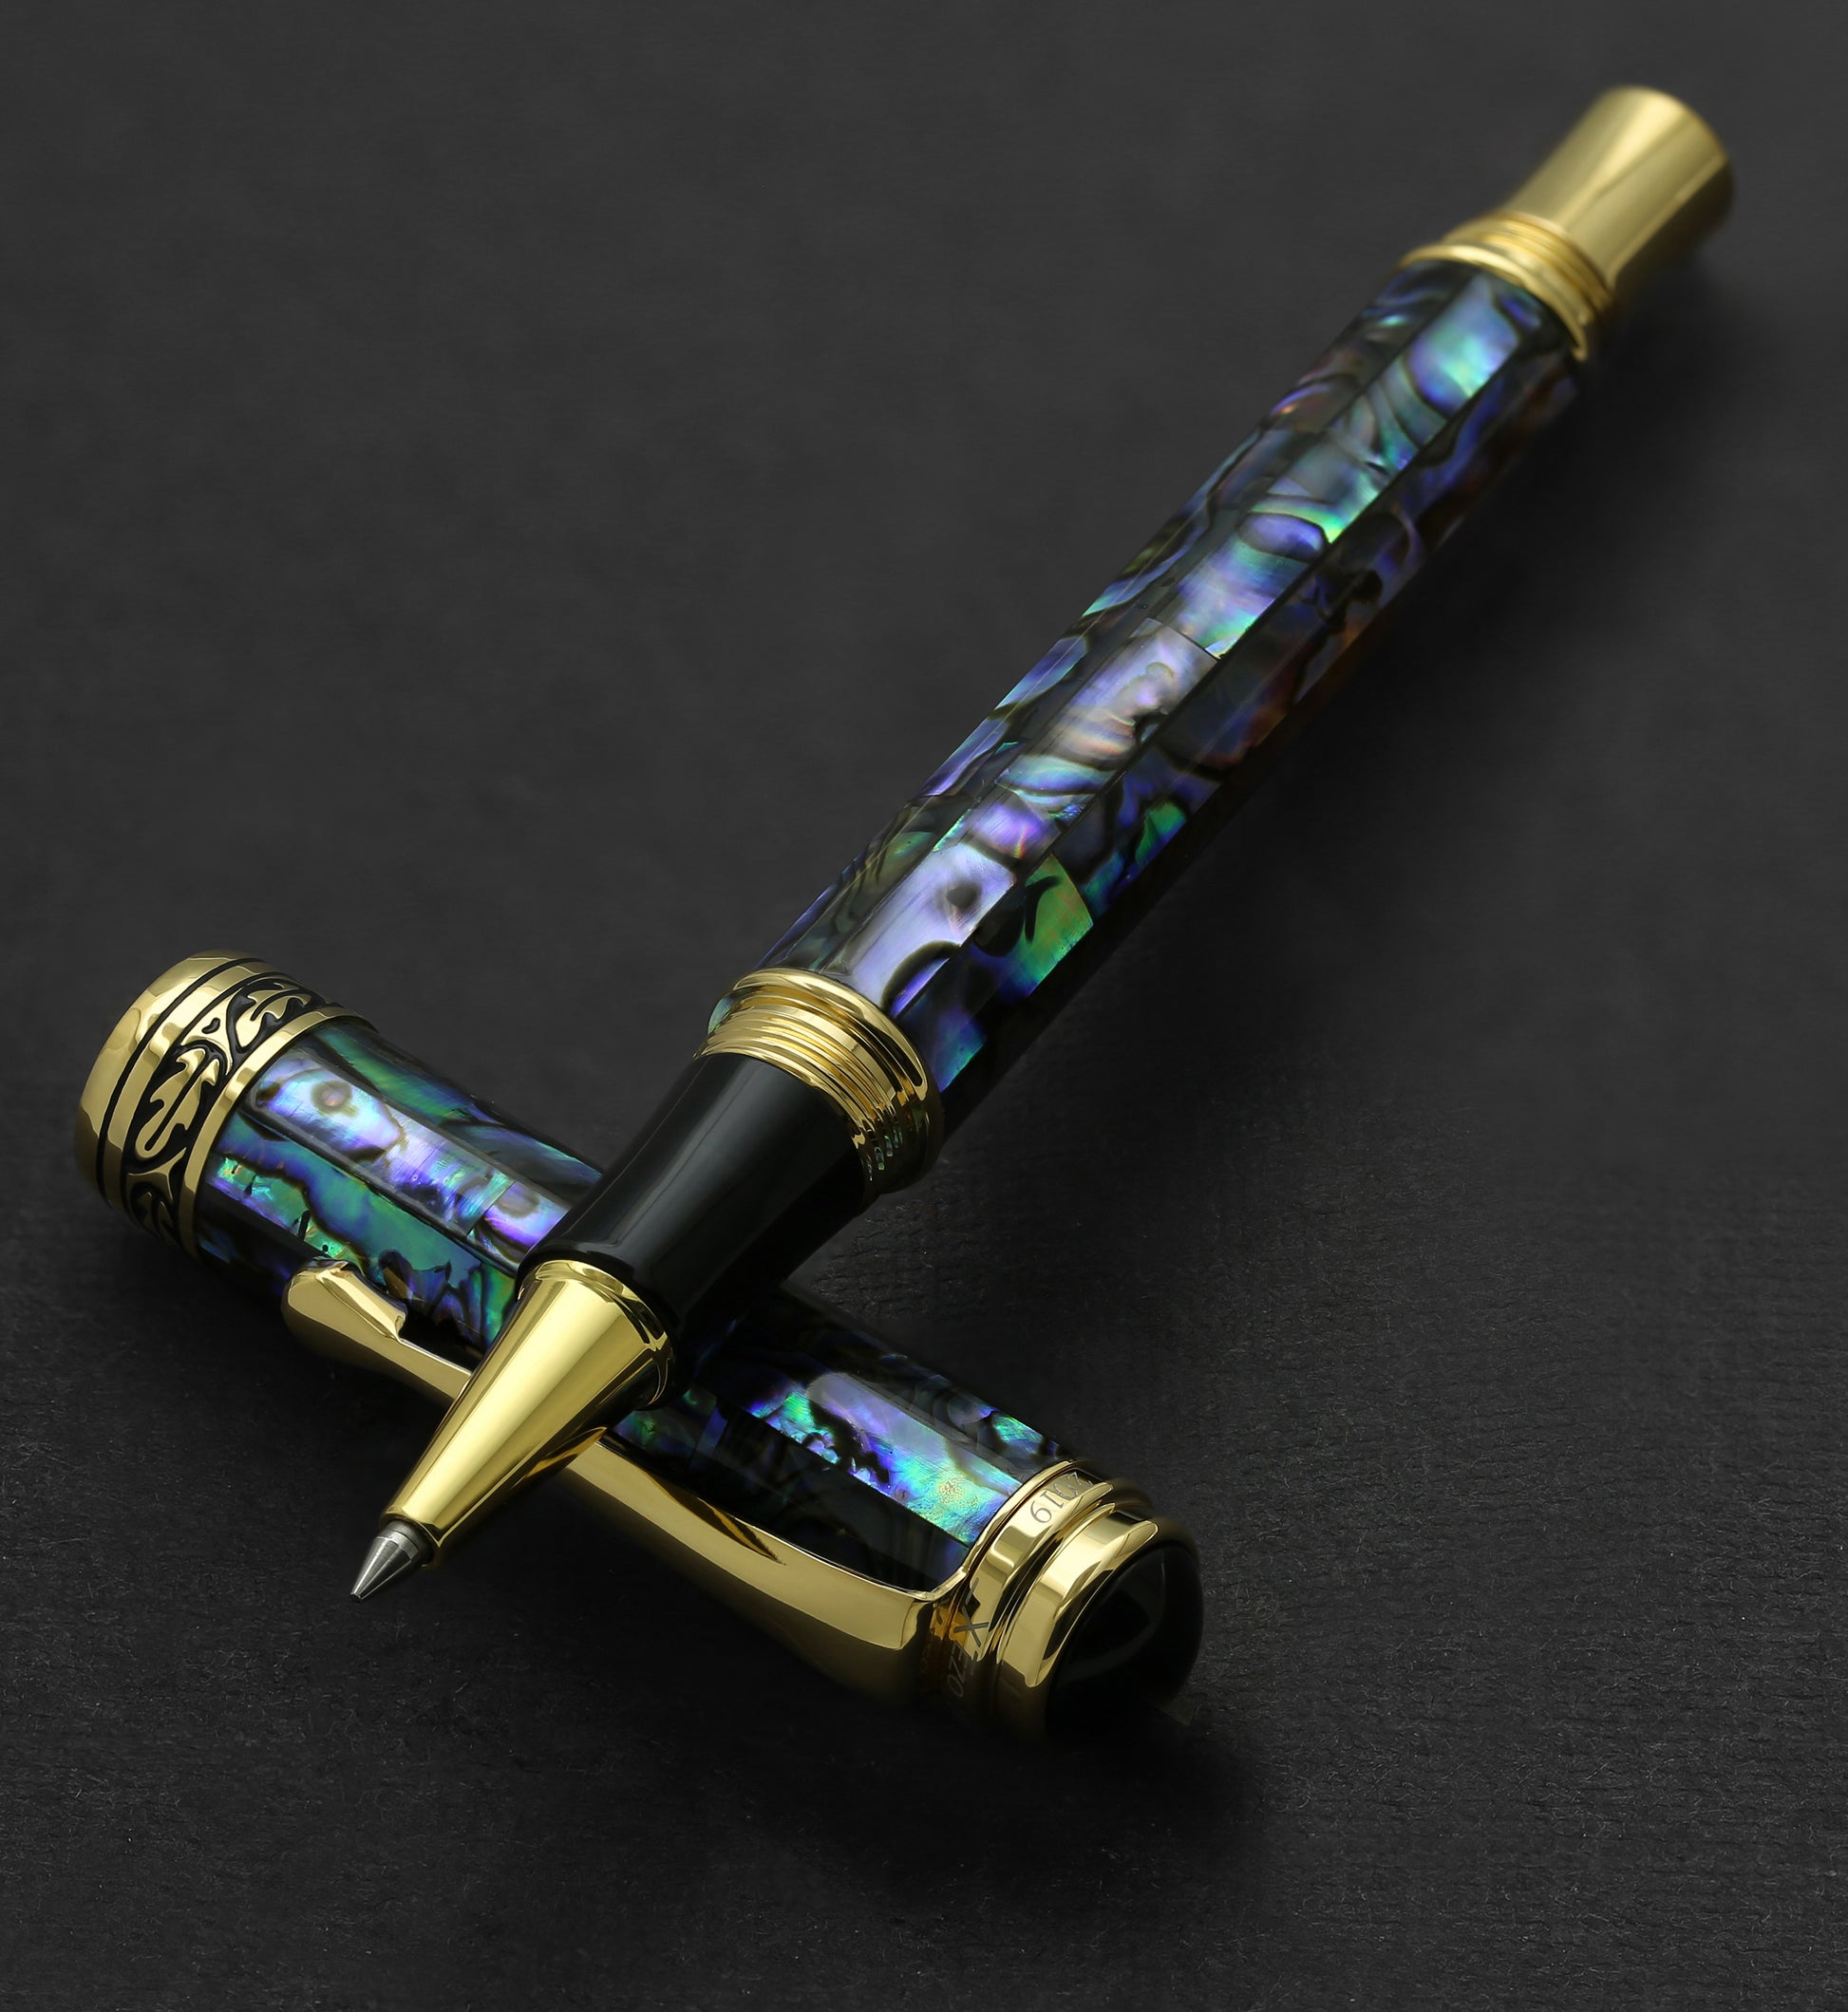 Maestro Sea Shell RPG-1 rollerball pen resting on its cap